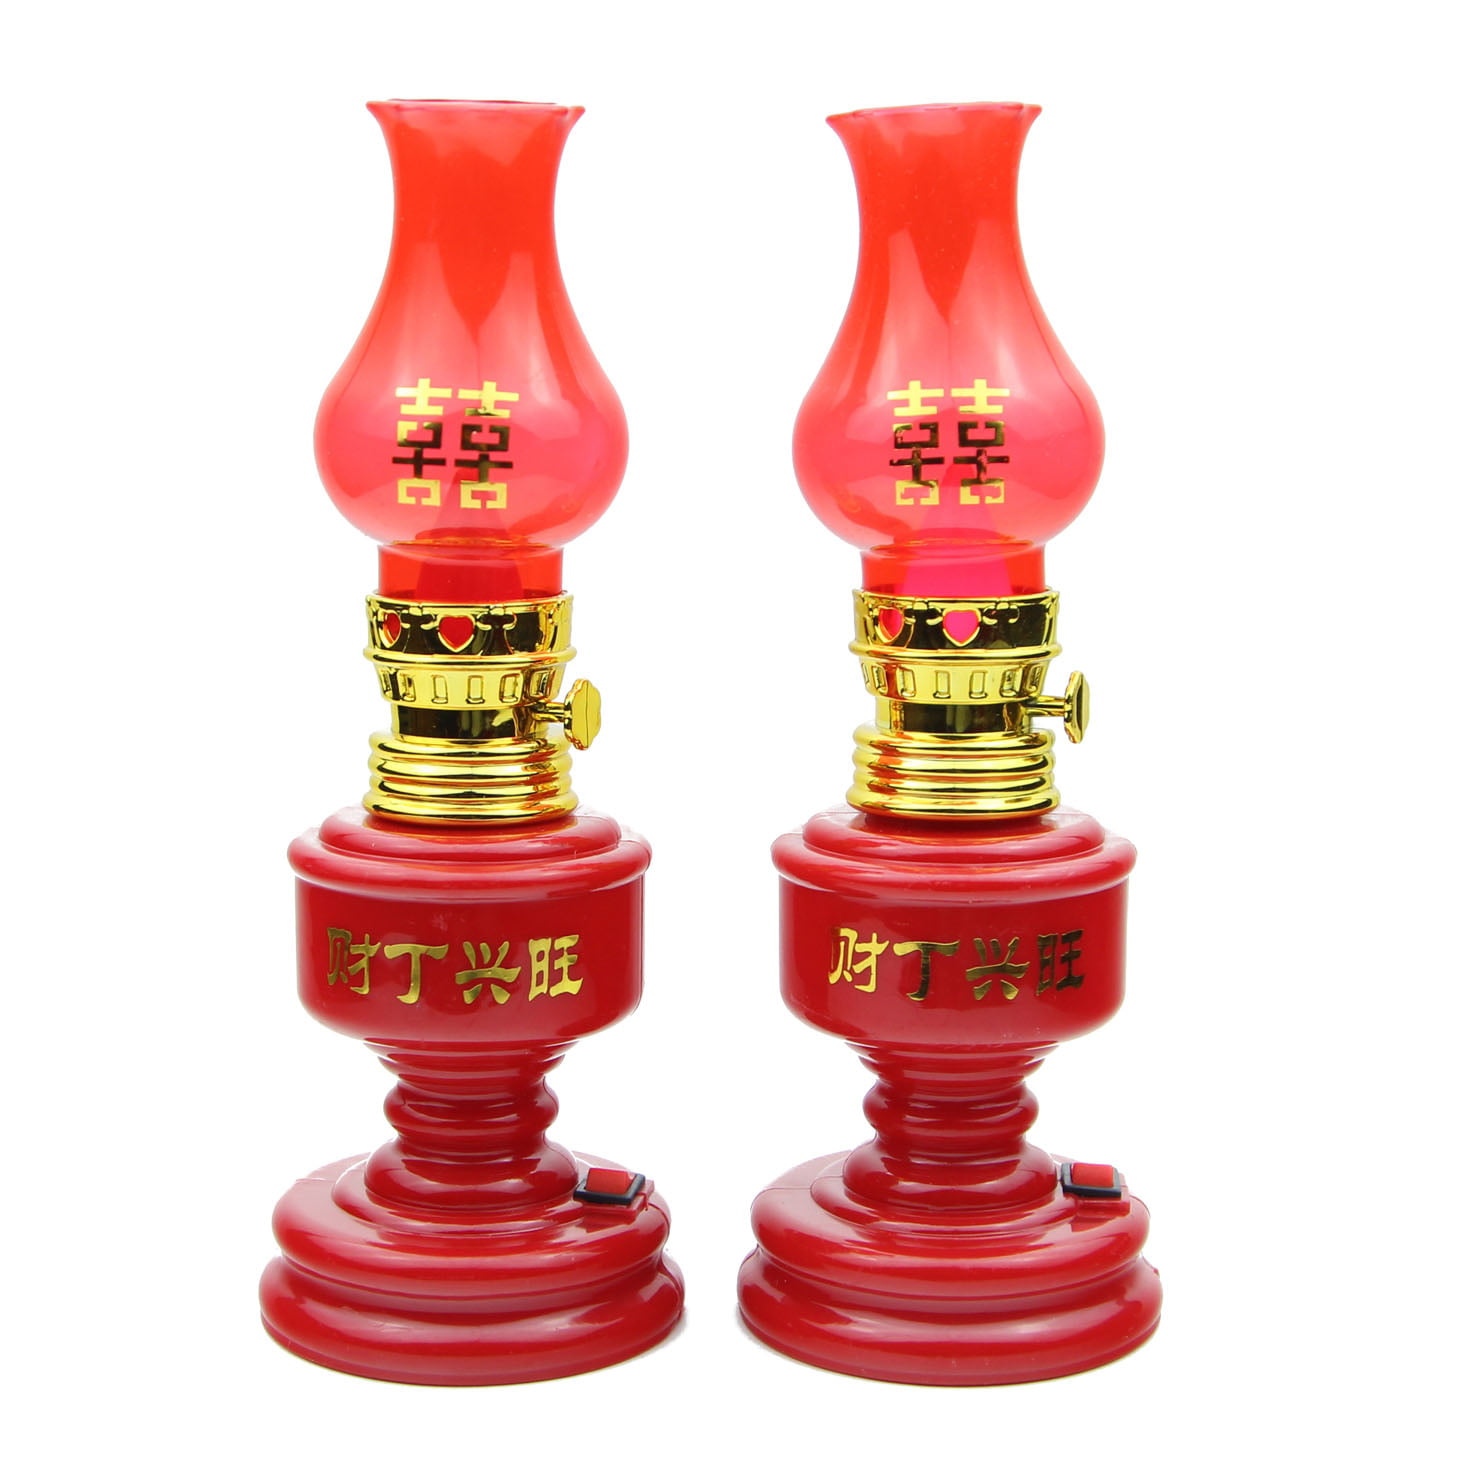 Pair of Double Happiness Lamps - Walmart.com